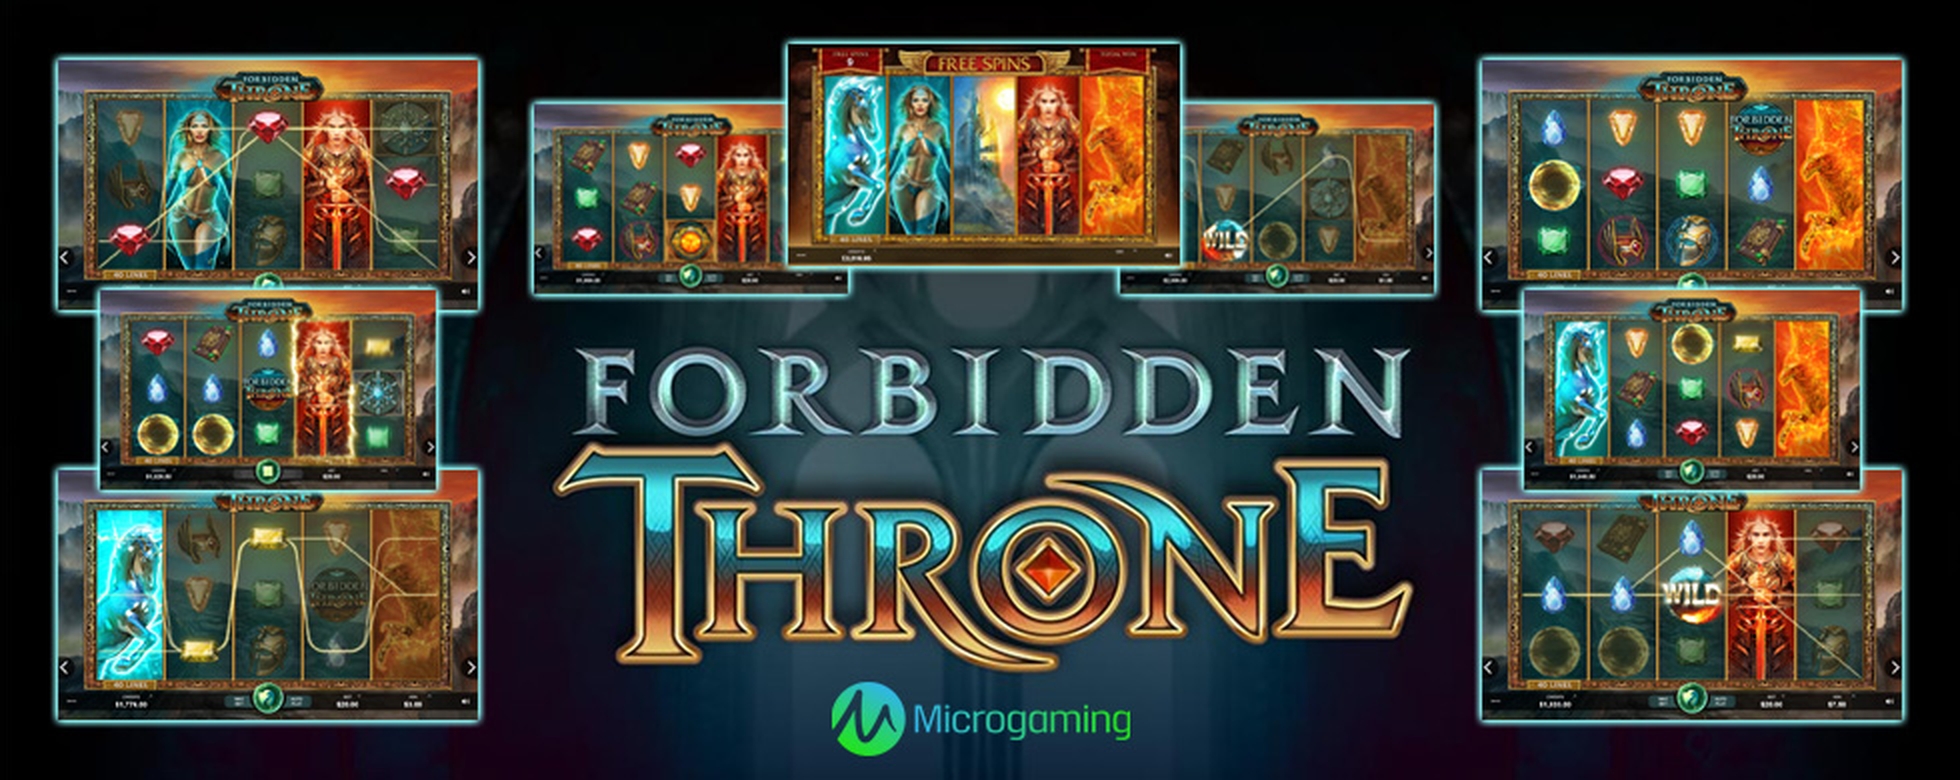 The Forbidden Throne Online Slot Demo Game by MahiGaming